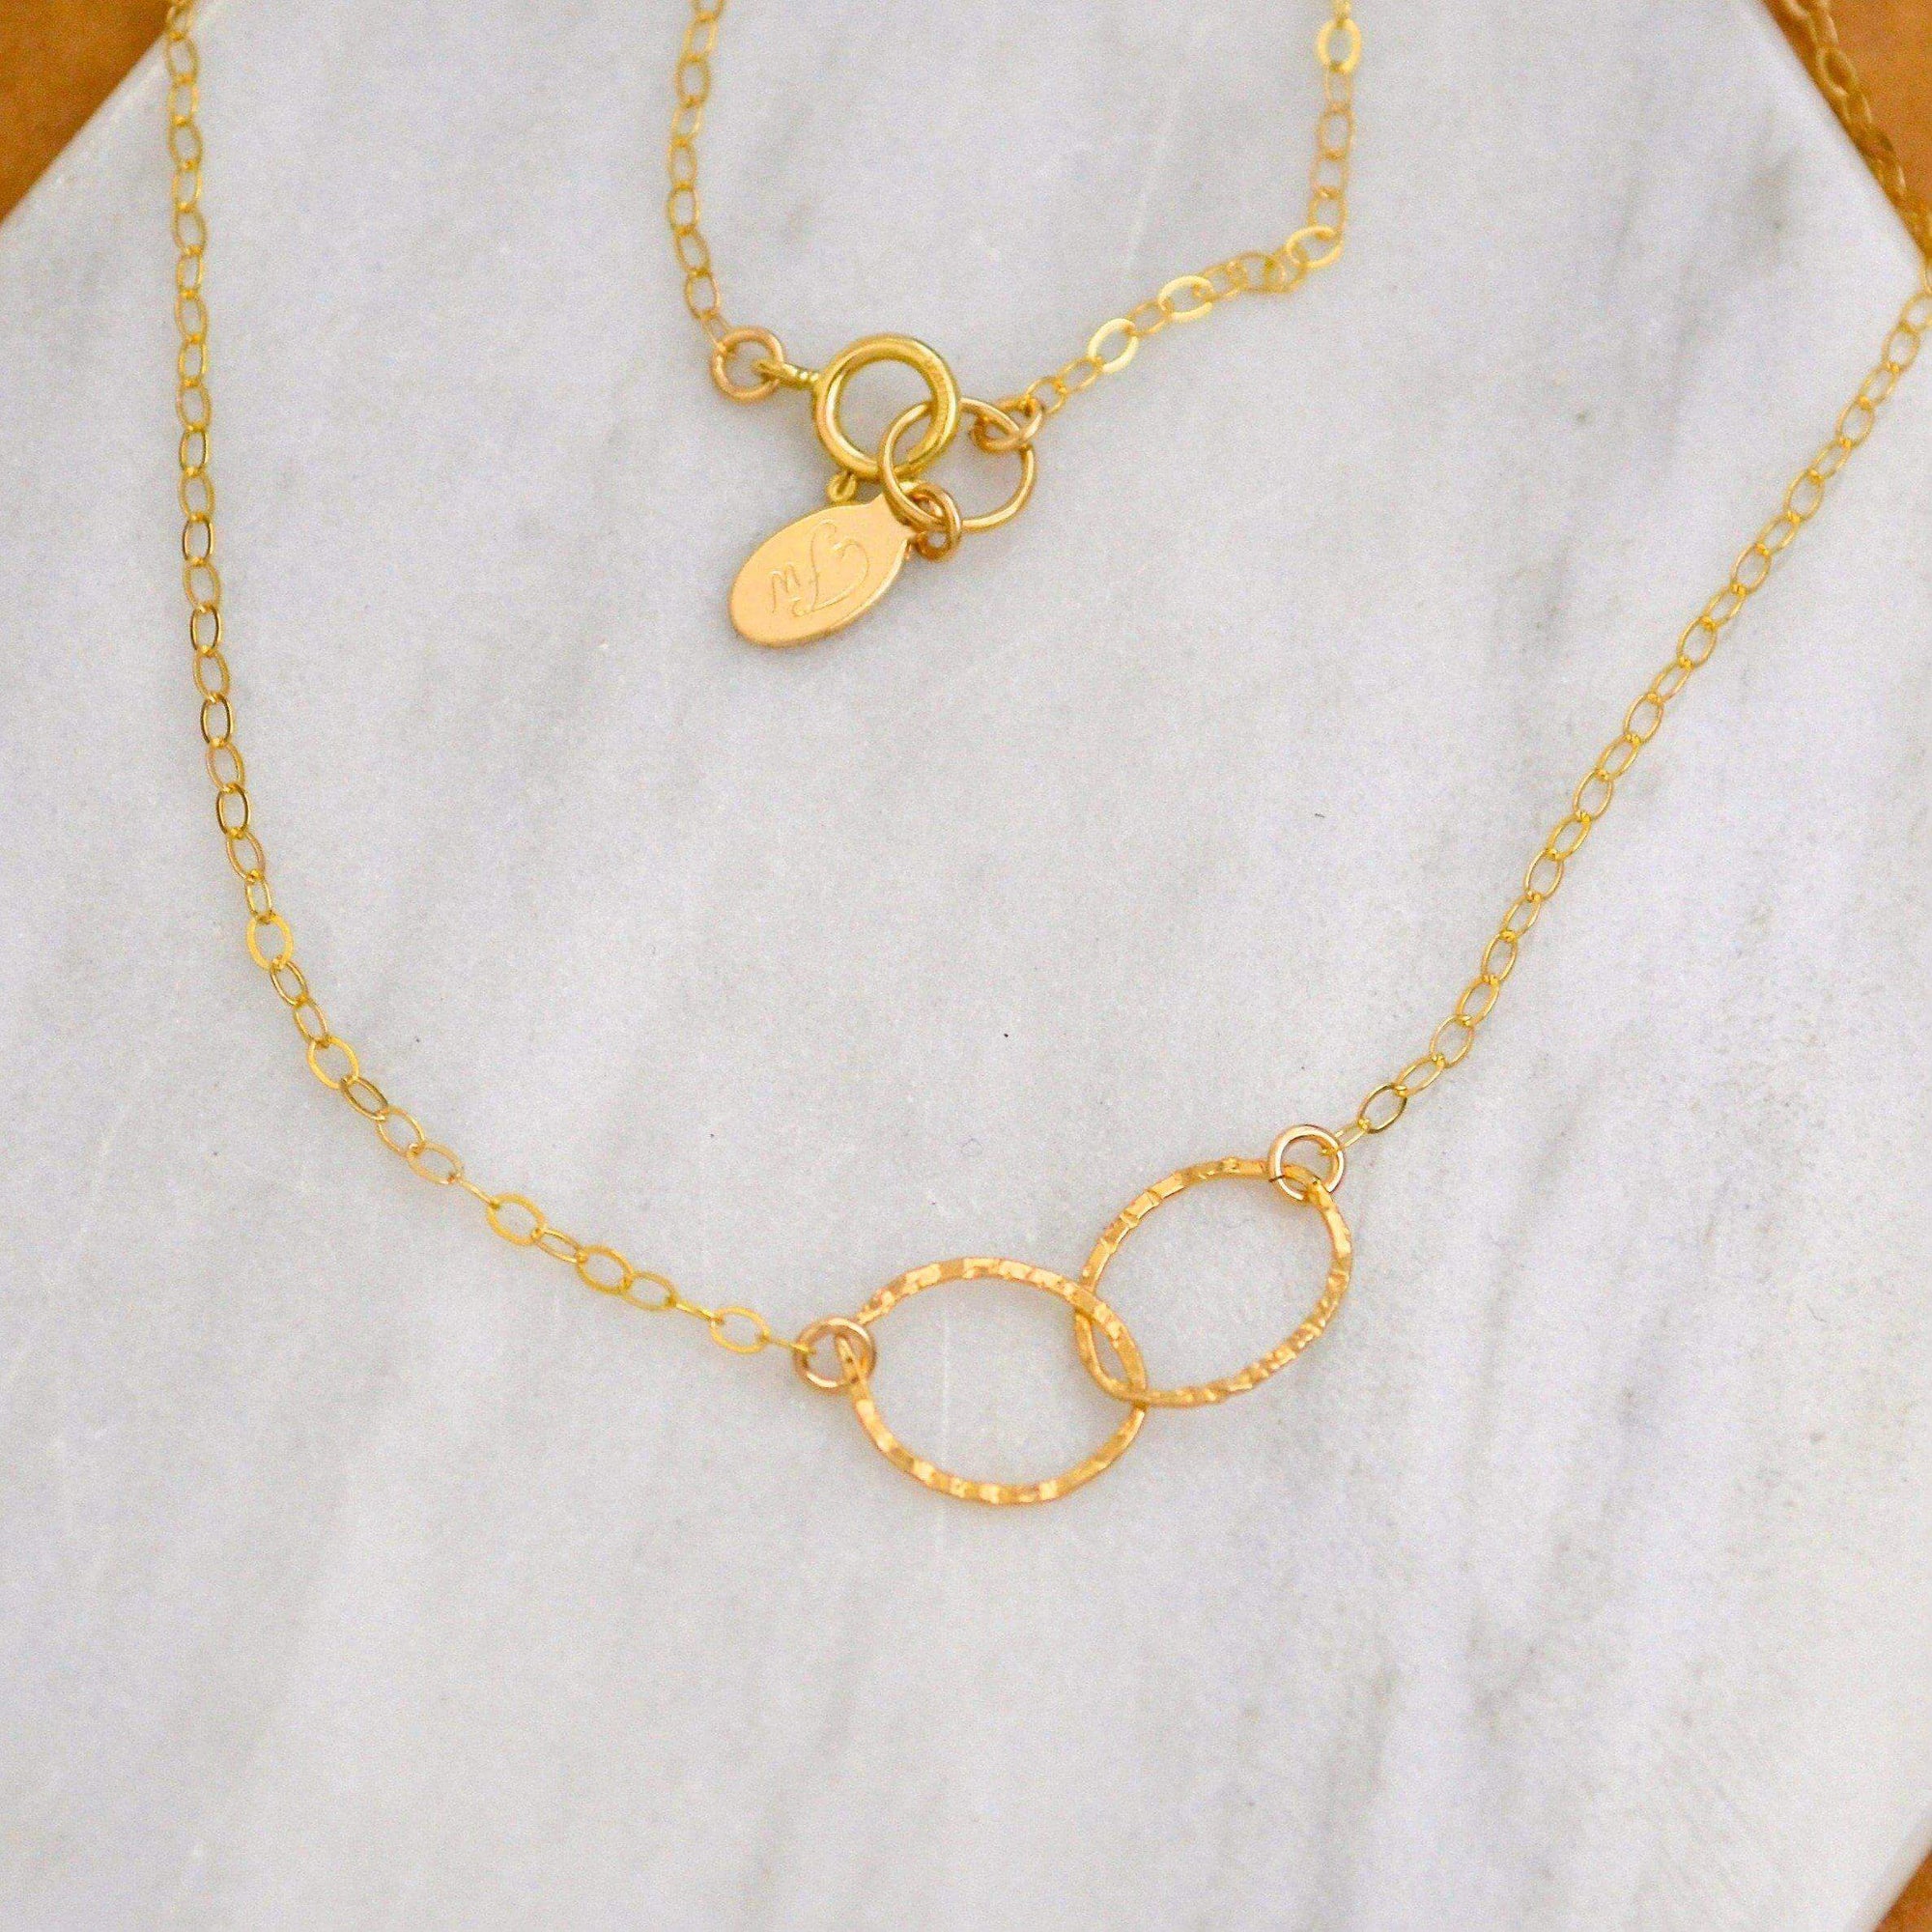 Dainty Gold Filled Circle Pendant Necklace – The Cord Gallery